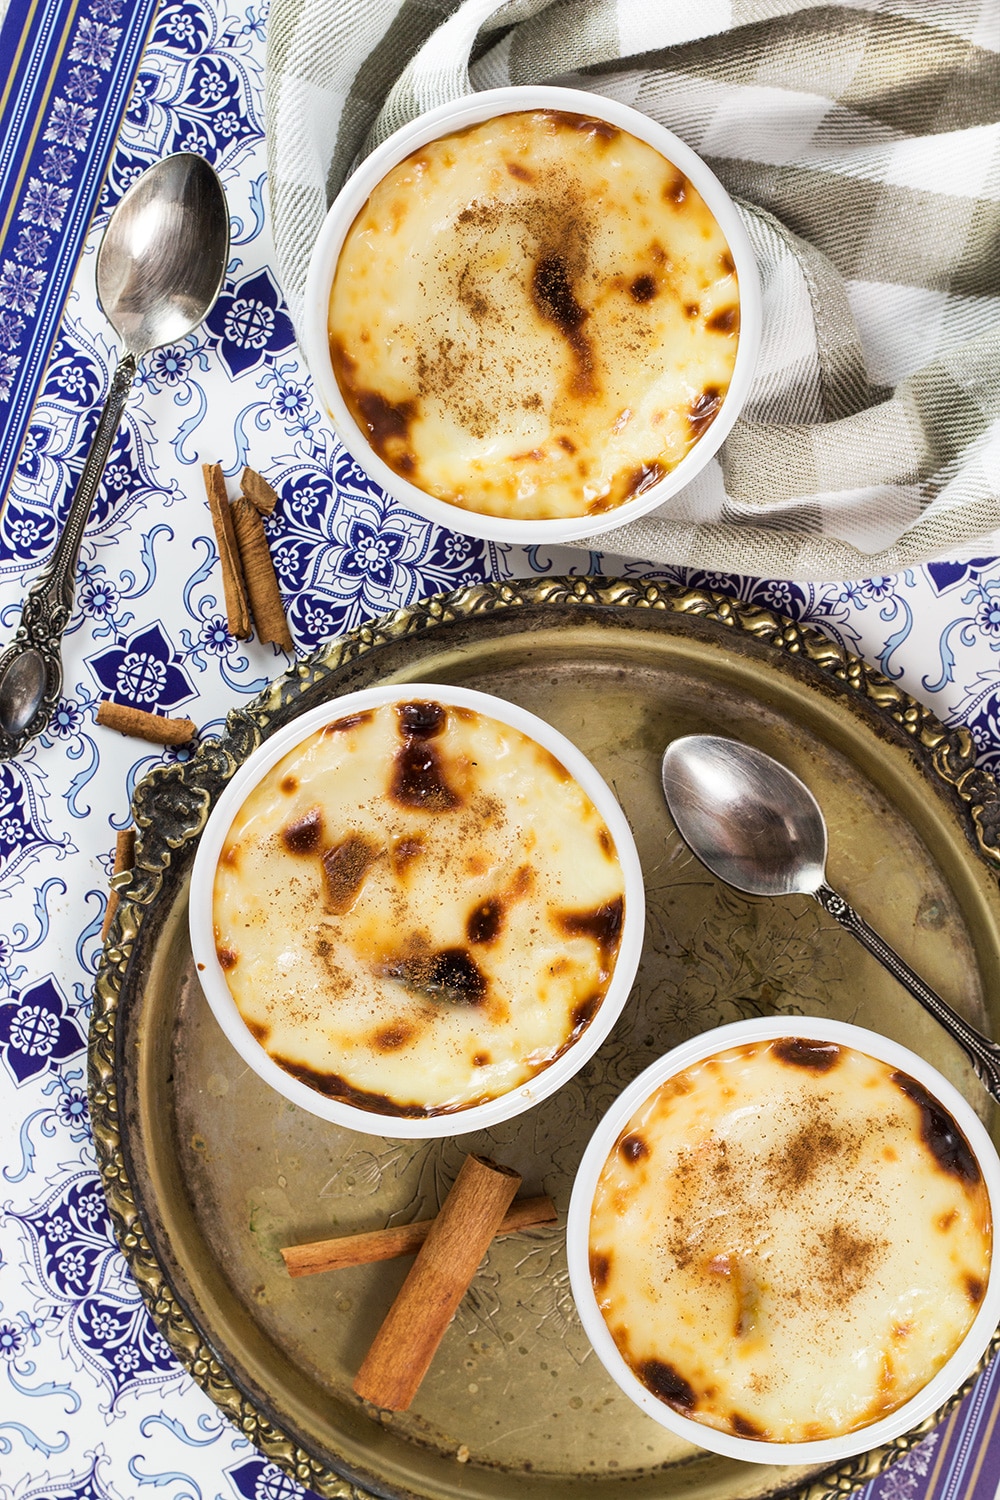 Creamy, rich, and melting in your mouth, this Turkish Rice Pudding (Sütlaç) can be served either warm or chilled. A perfect light dessert for any time of the day! | cookingtheglobe.com